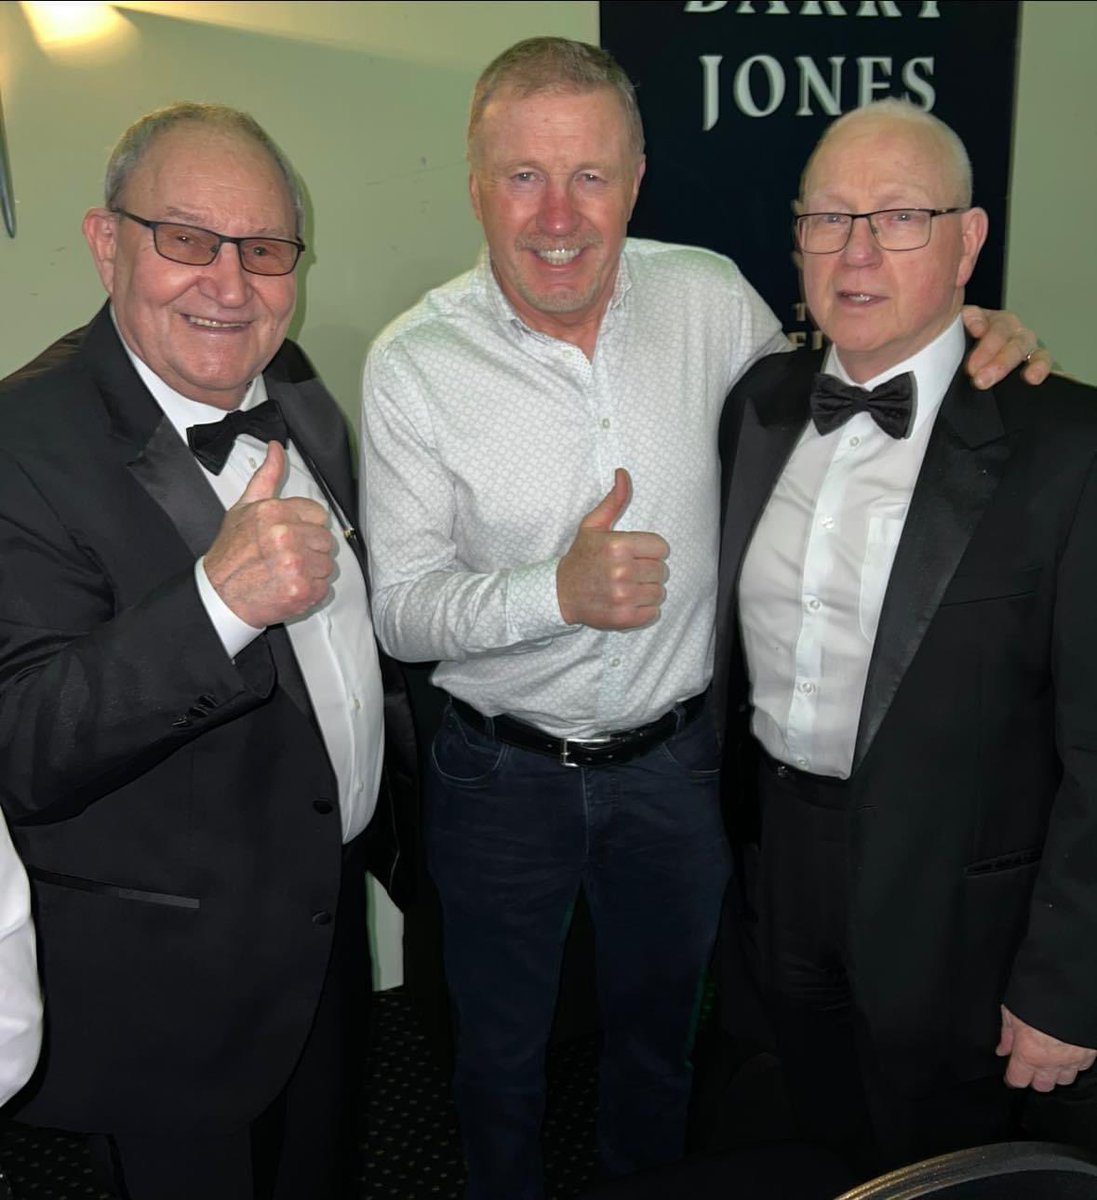 ☘️Former Super Middleweight Champion of the World ‘The Celtic Warrior’ Steve Collins pictured at our ‘St Patrick’s’ Excelsior Sporting Club Show in March, with BBC football pundit Tom Ross and former Birmingham Irish boxing promoter/ manager Paddy Lynch.